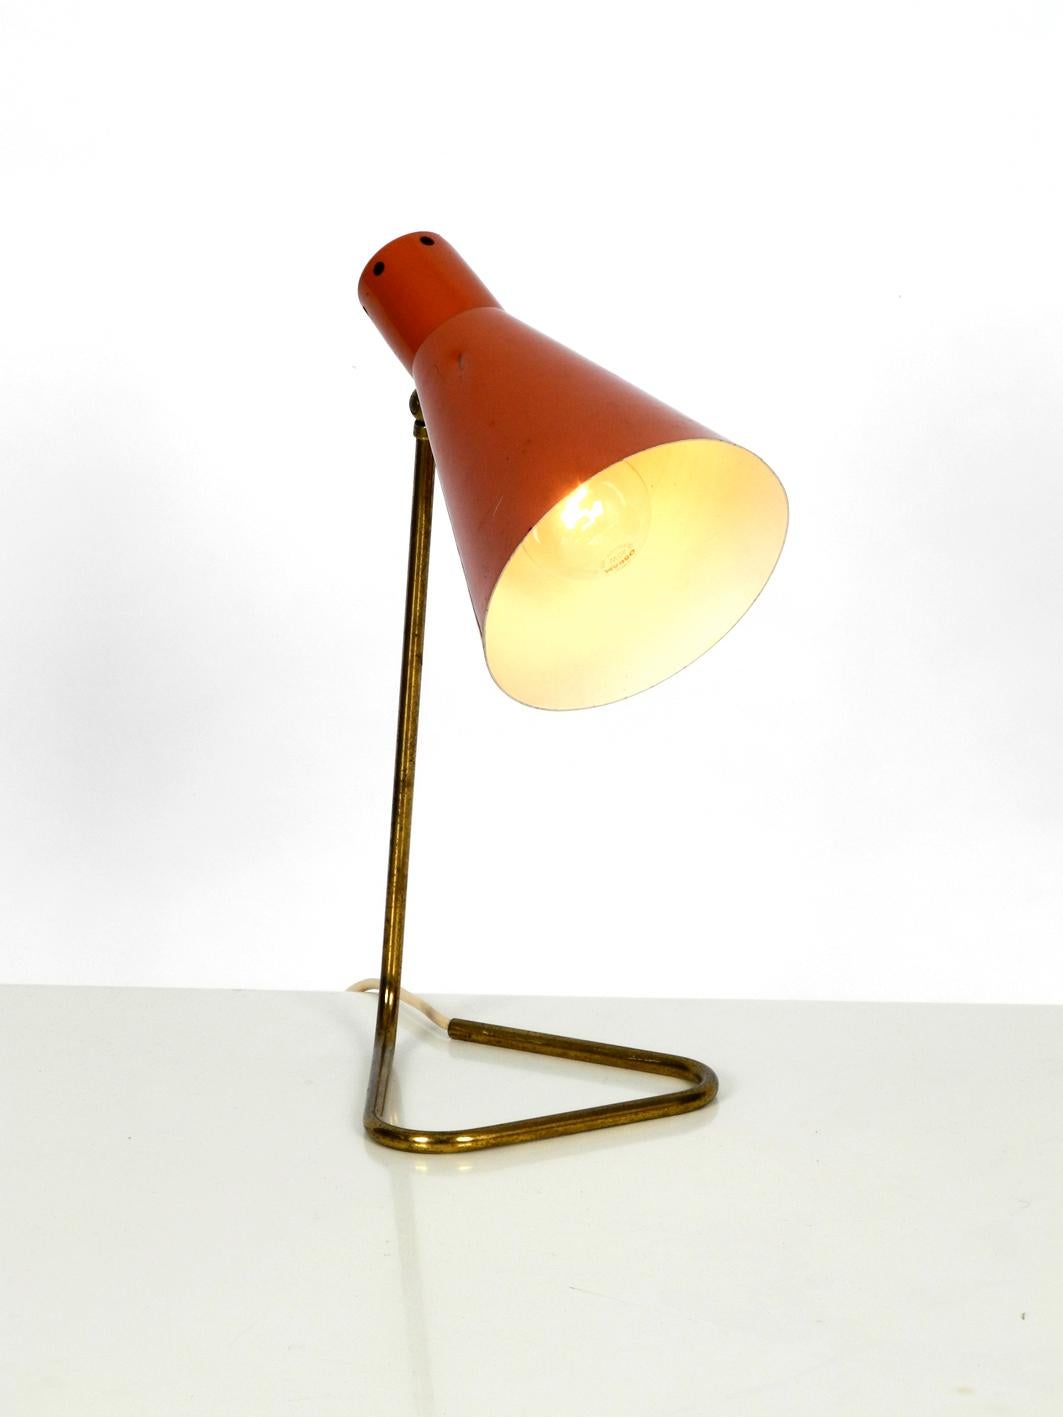 Beautiful original 1950s table lamp from Italy.
Foot and neck of a curved brass tube, with cable routing. Lampshade is painted with brick red paint. Very nice typical minimalist midcentury design with a fantastic patina. Good vintage condition.